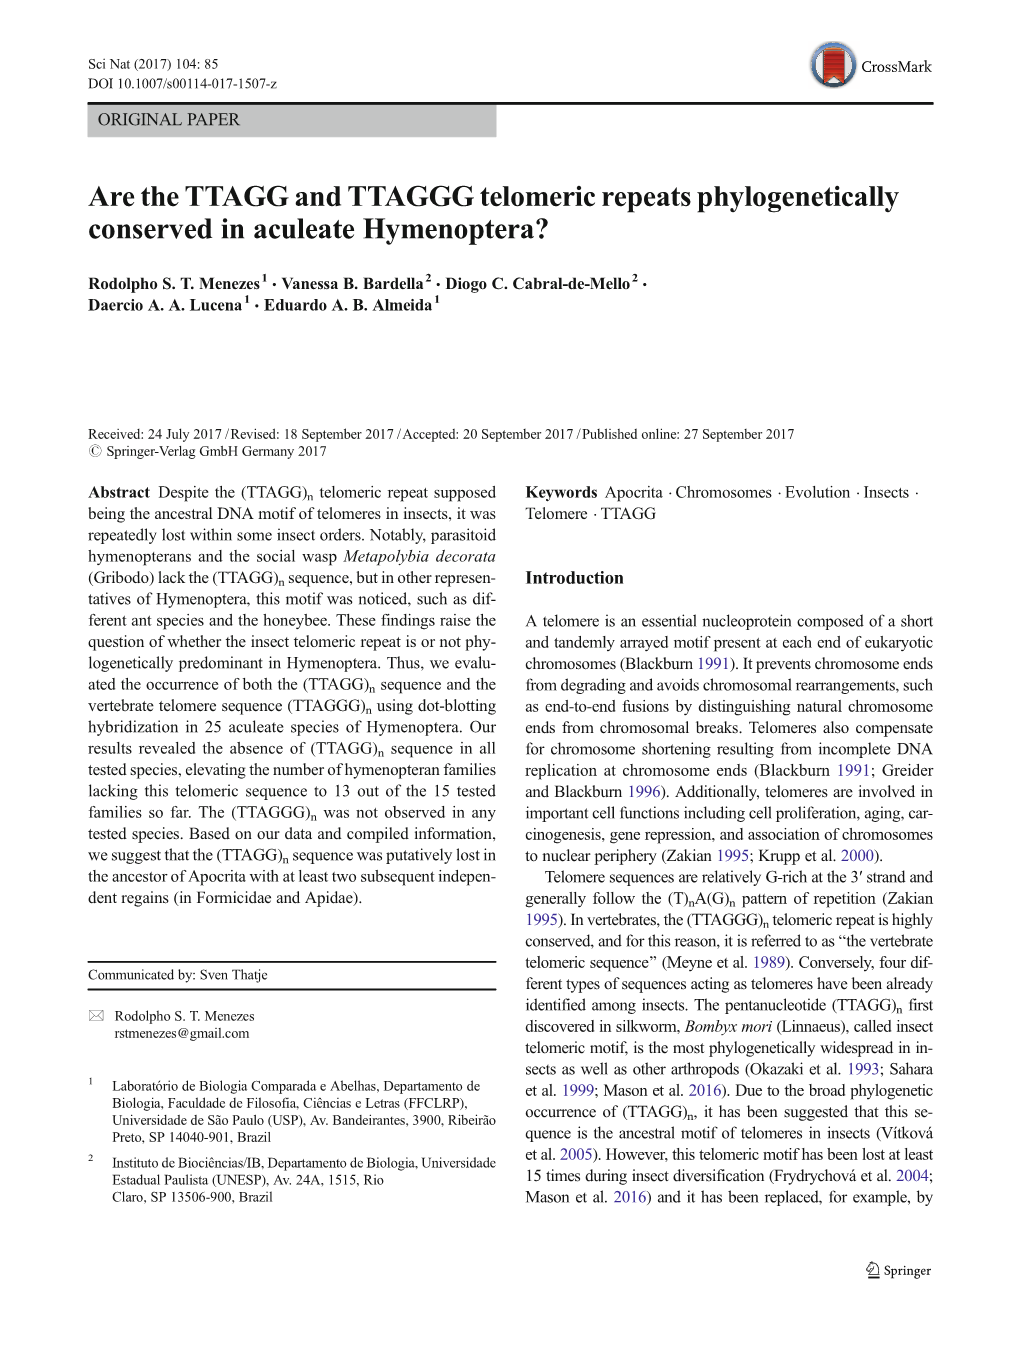 Are the TTAGG and TTAGGG Telomeric Repeats Phylogenetically Conserved in Aculeate Hymenoptera?